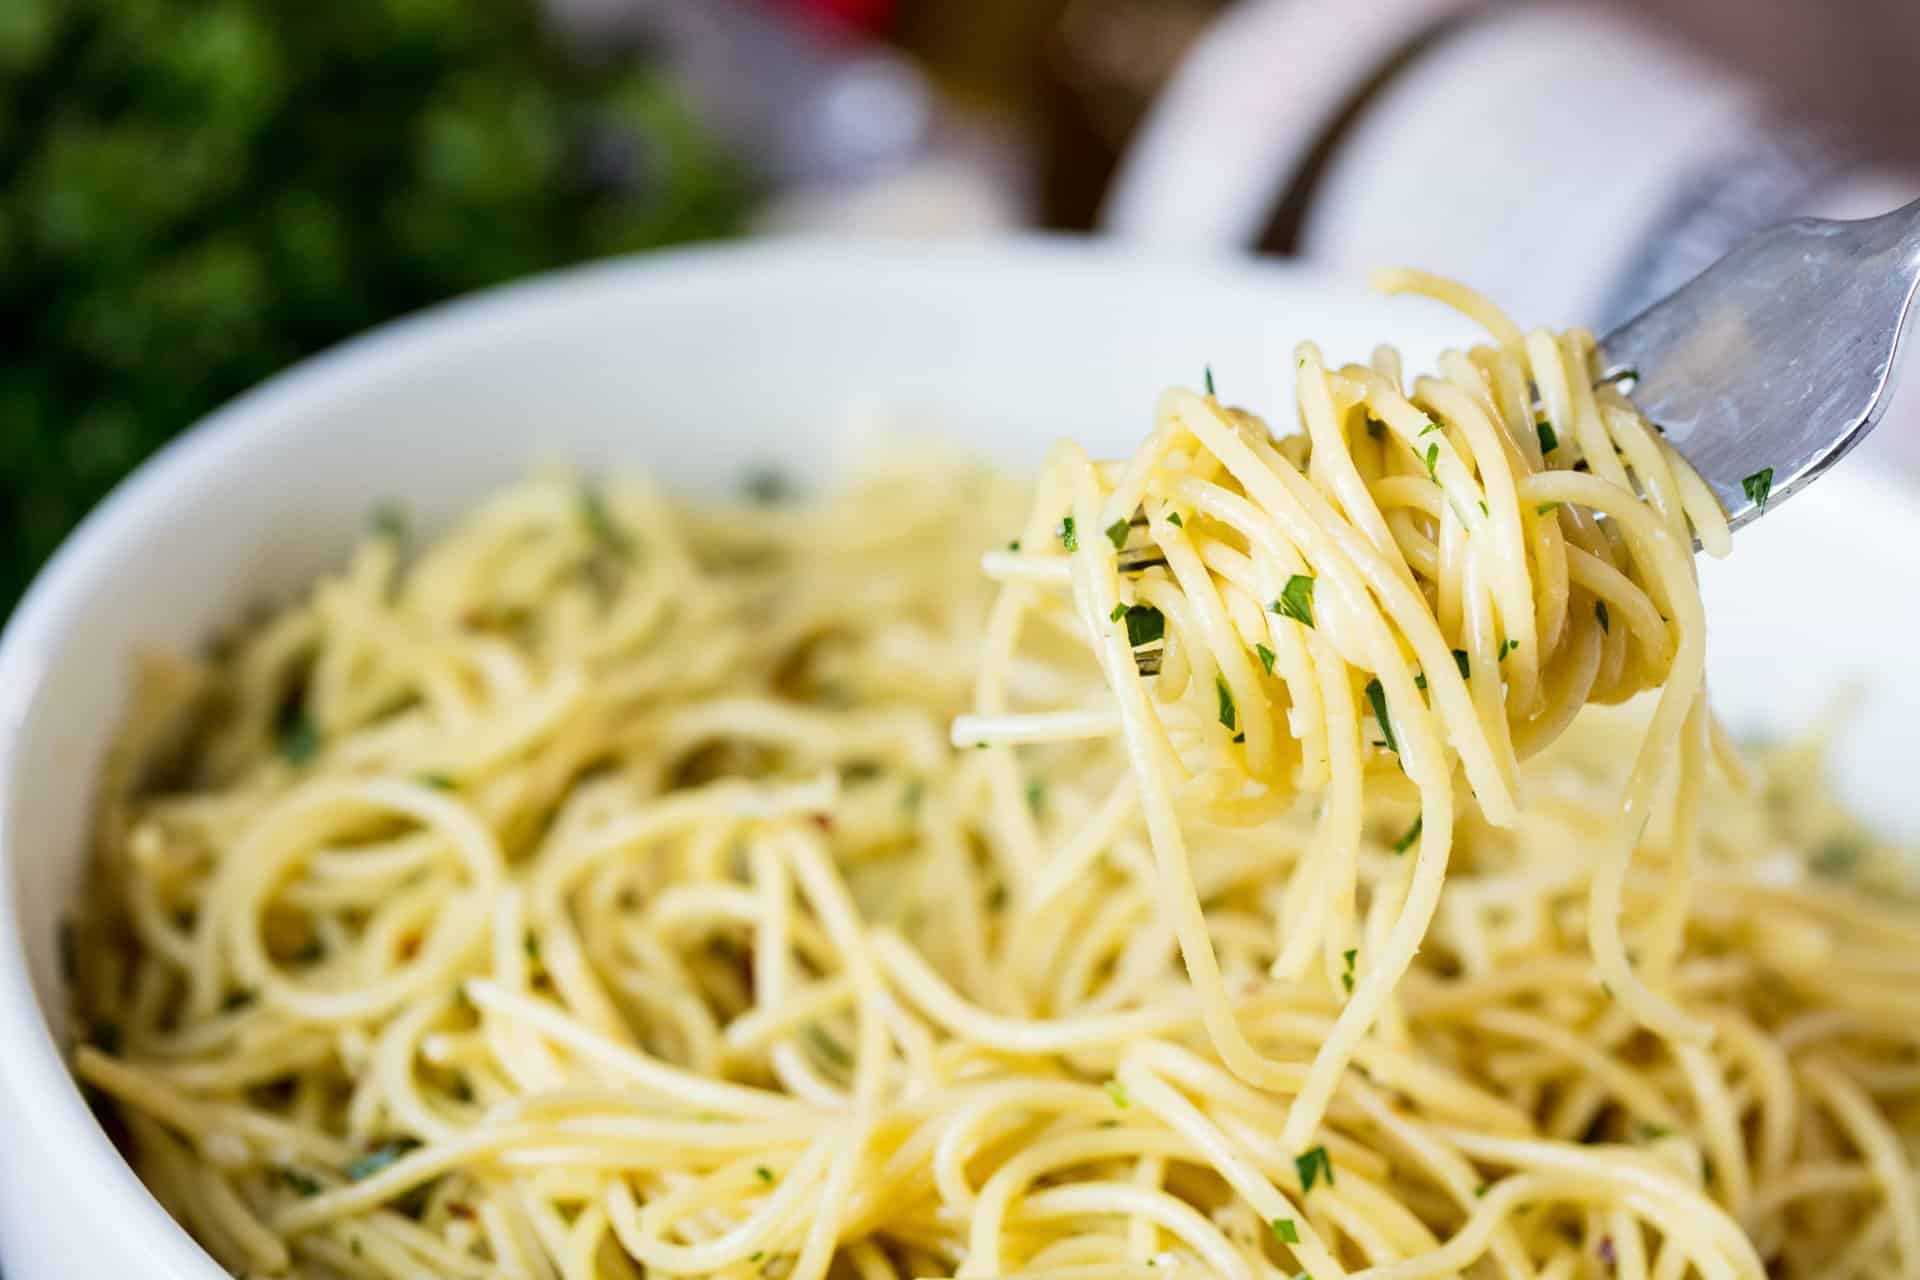 This Super Easy Olive Oil Pasta is a simple side dish that is quick to make and easily customizable to become a full meal. Just add meat and veggies!